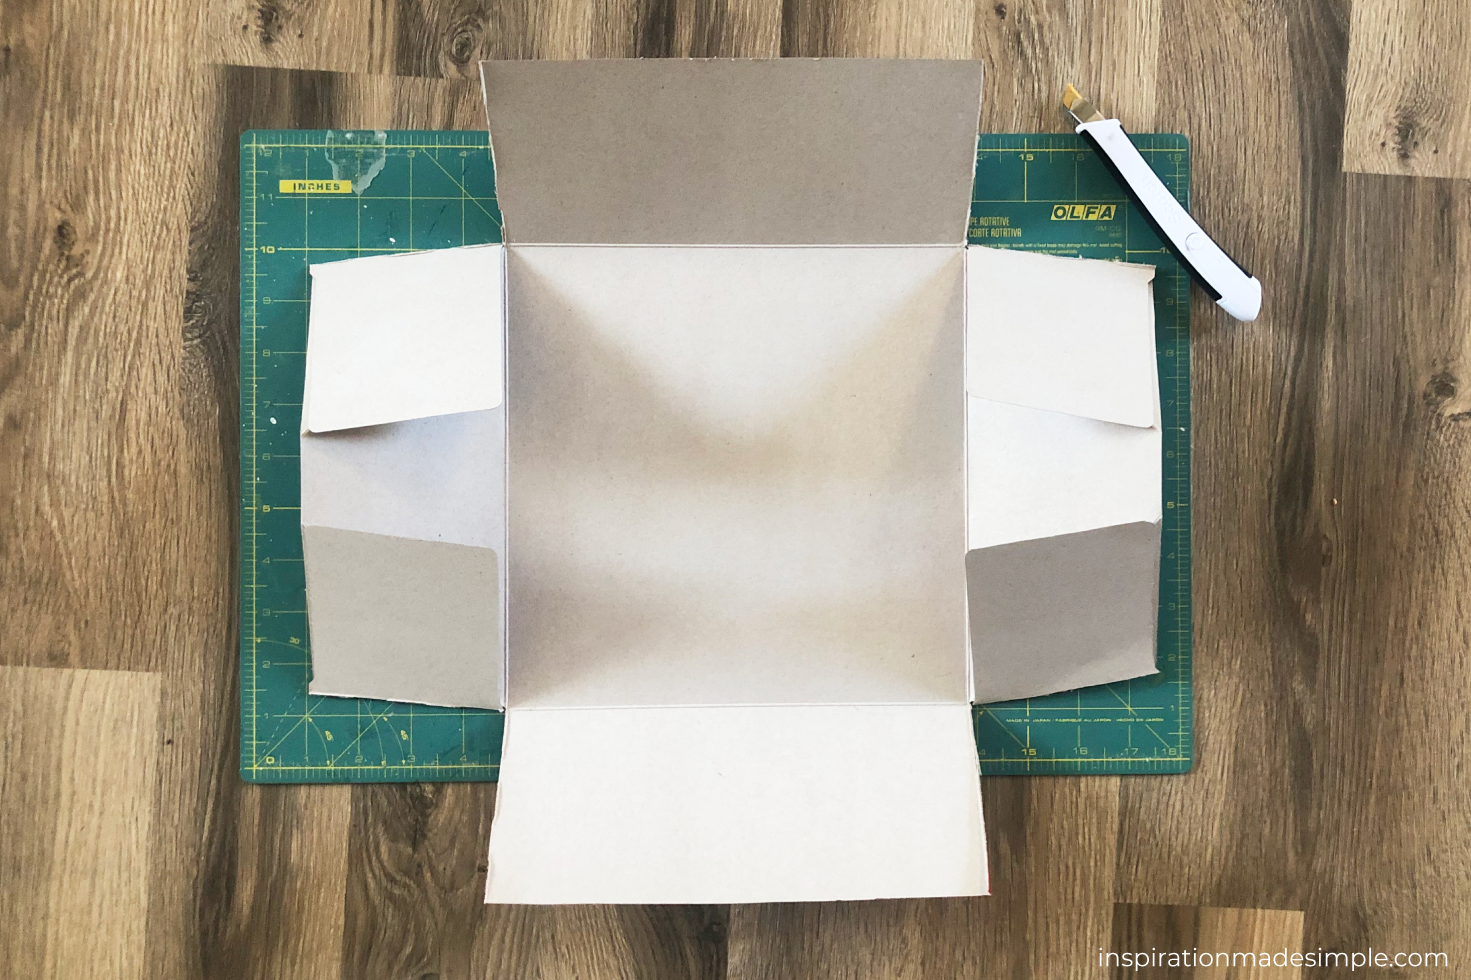 How To Make a DIY Explosion Gift Box